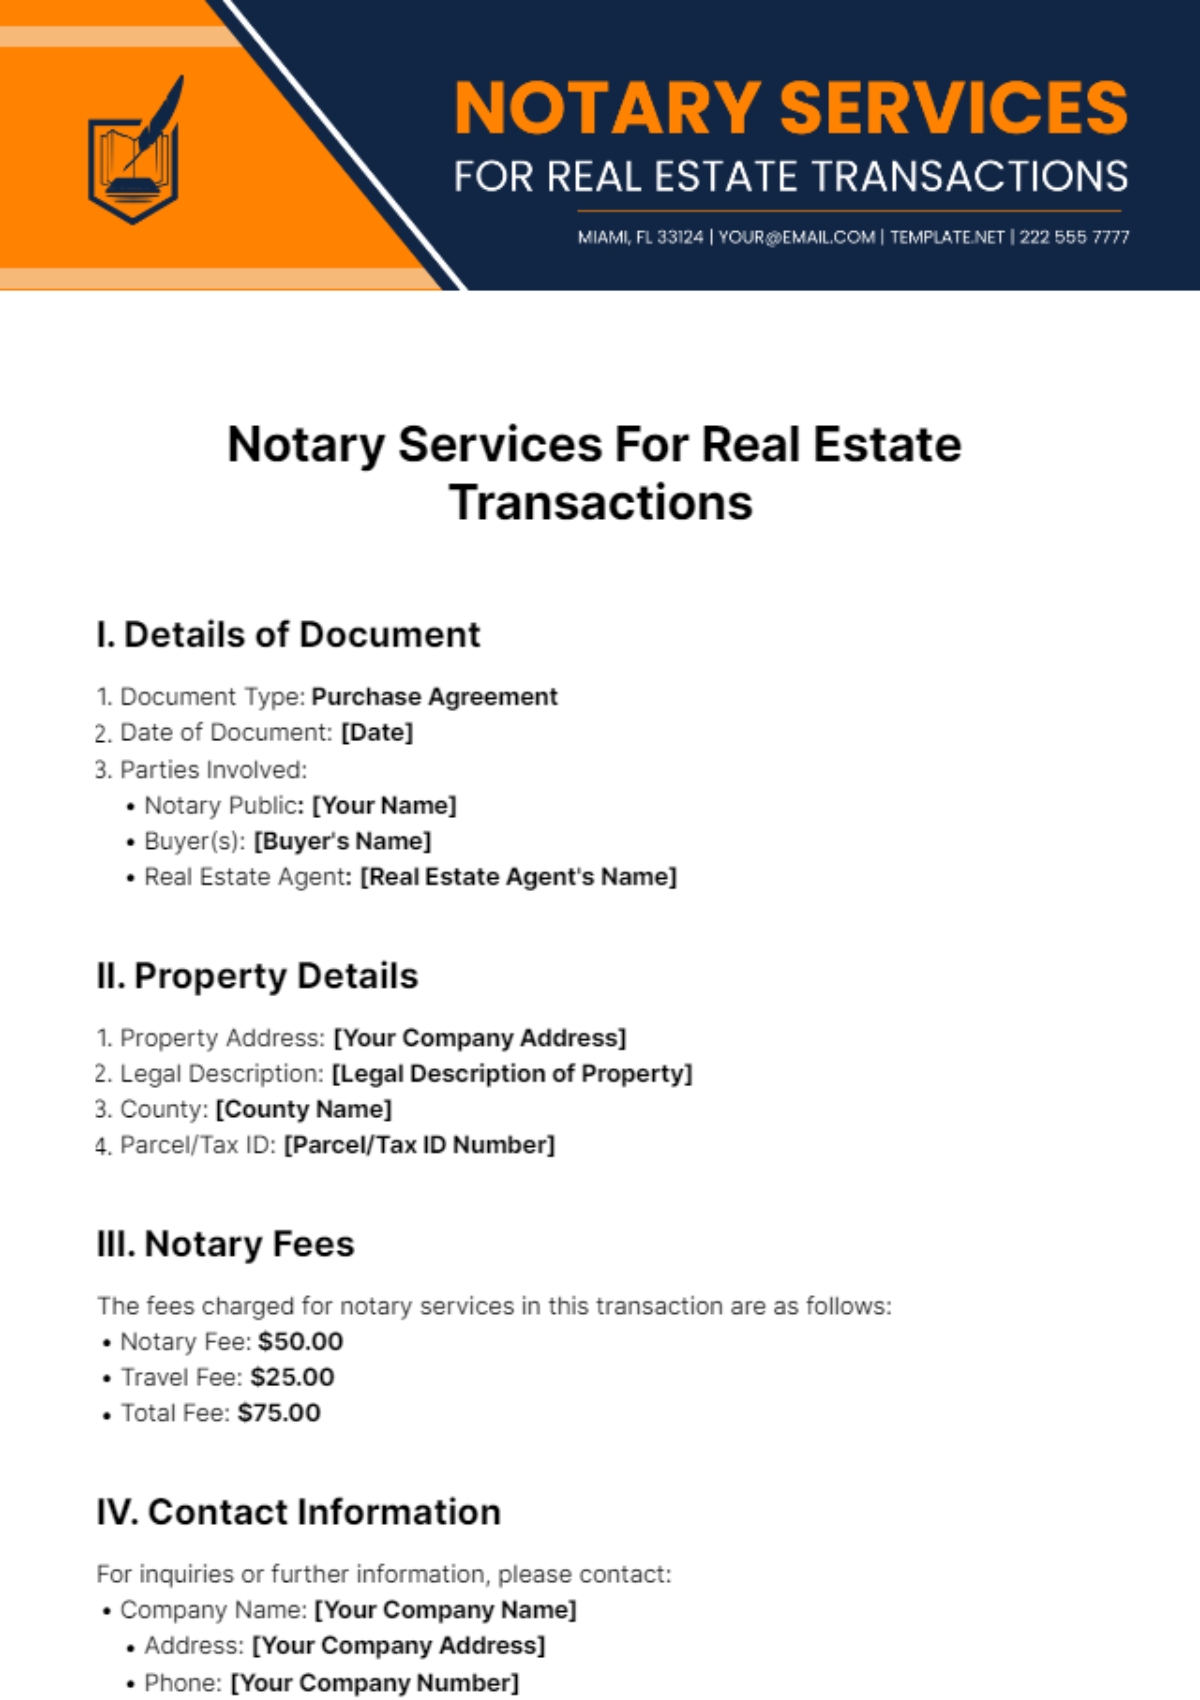 Free Notary Services for Real Estate Transactions Template